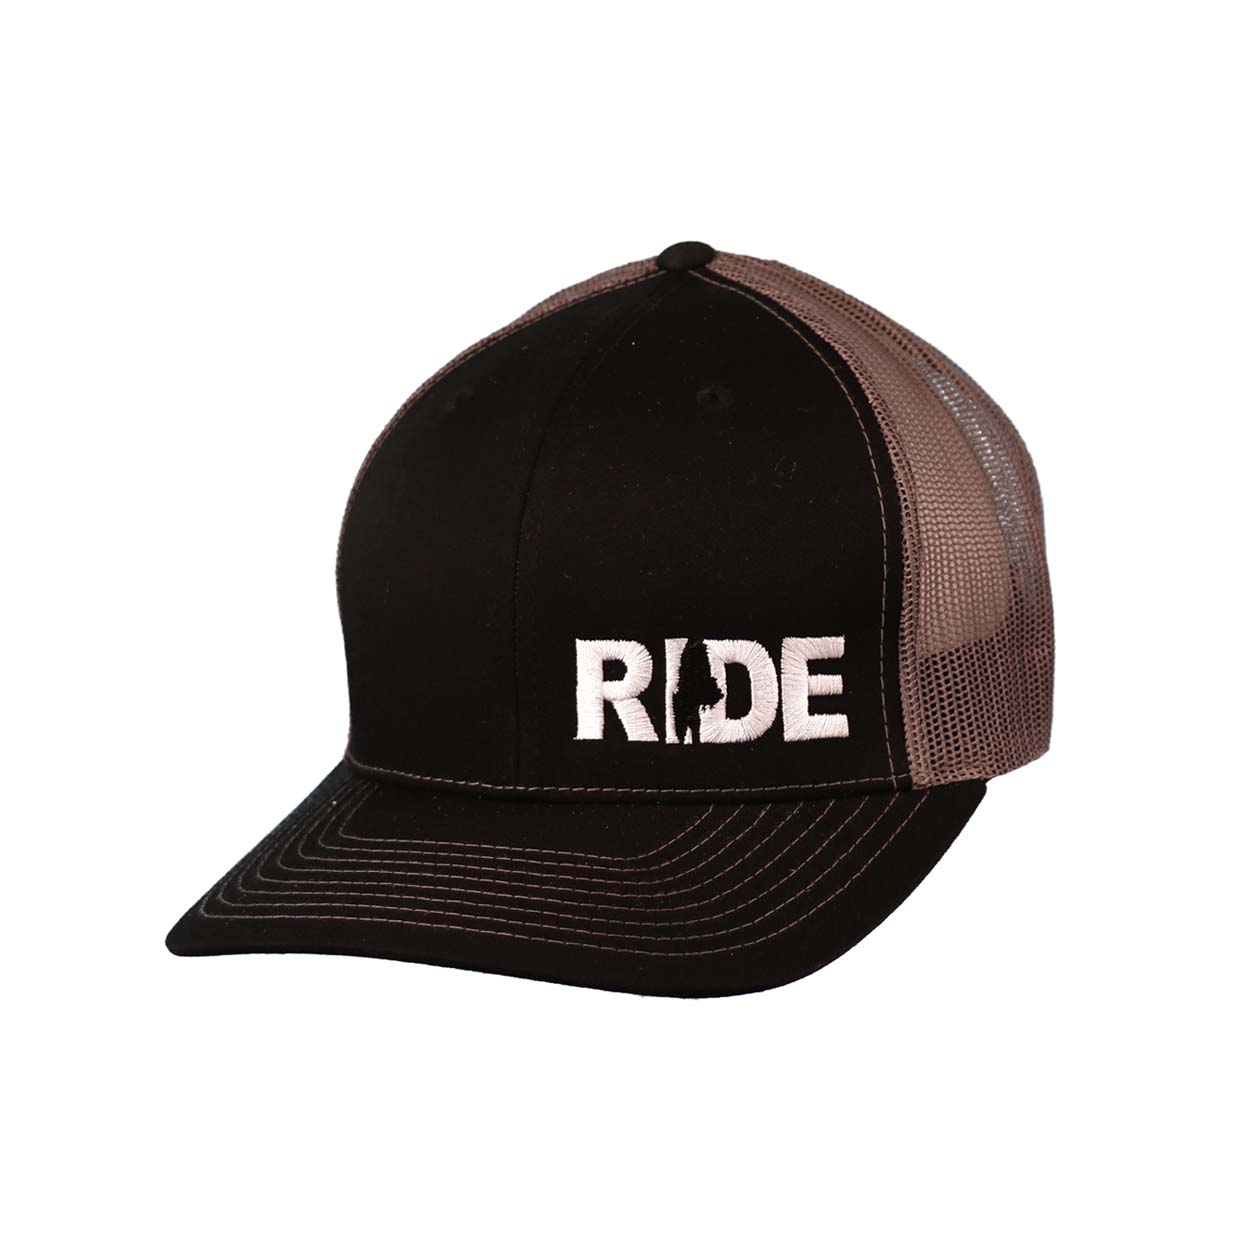 Ride Maine Night Out Embroidered Snapback Trucker Hat Black/Gray